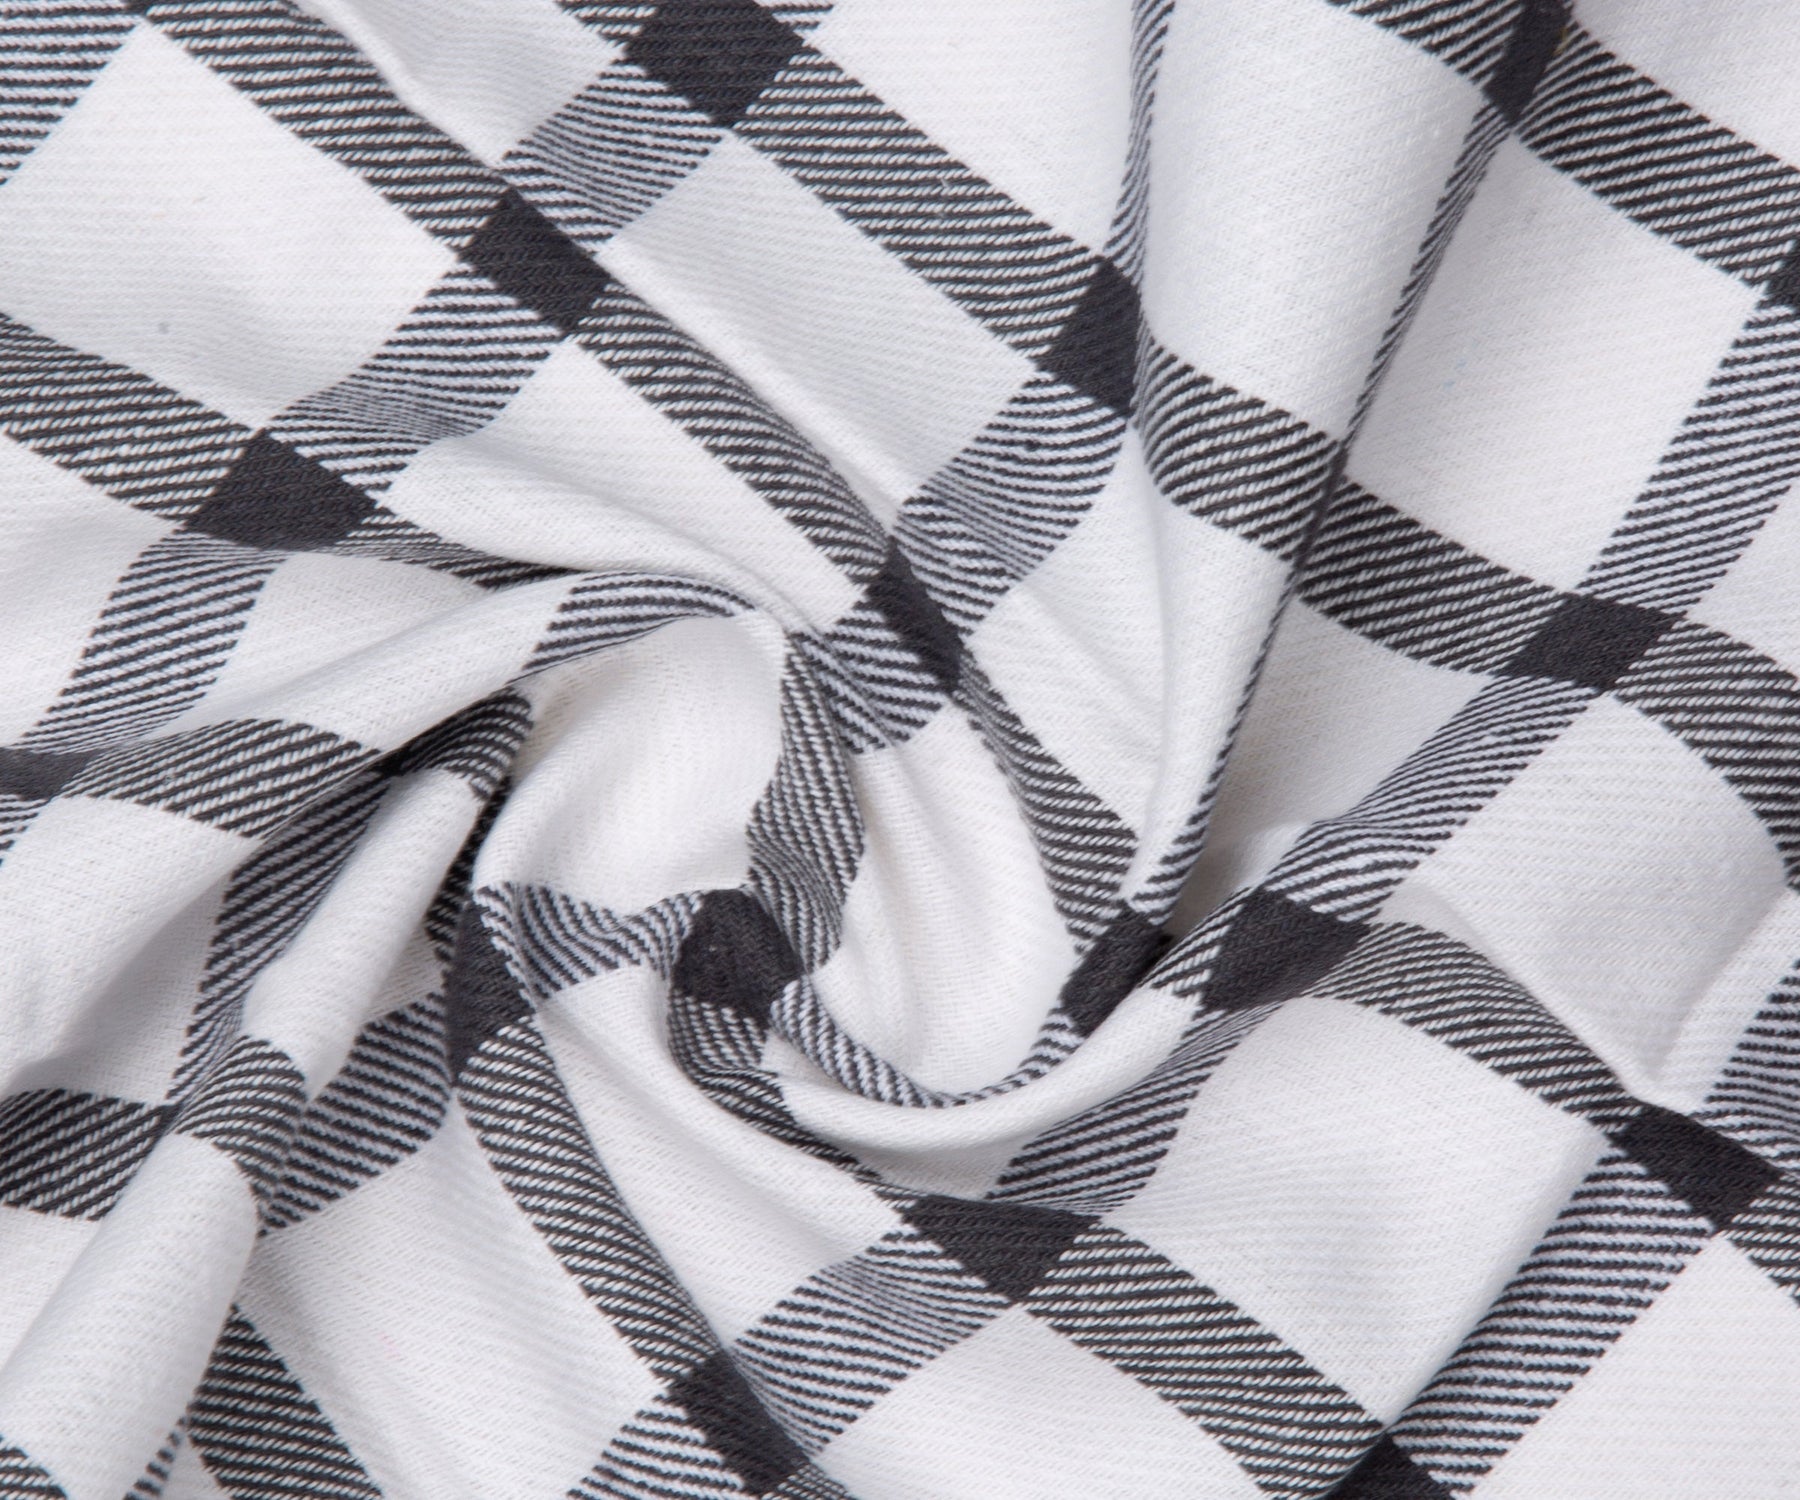 Black and white checkered towel fabric detail